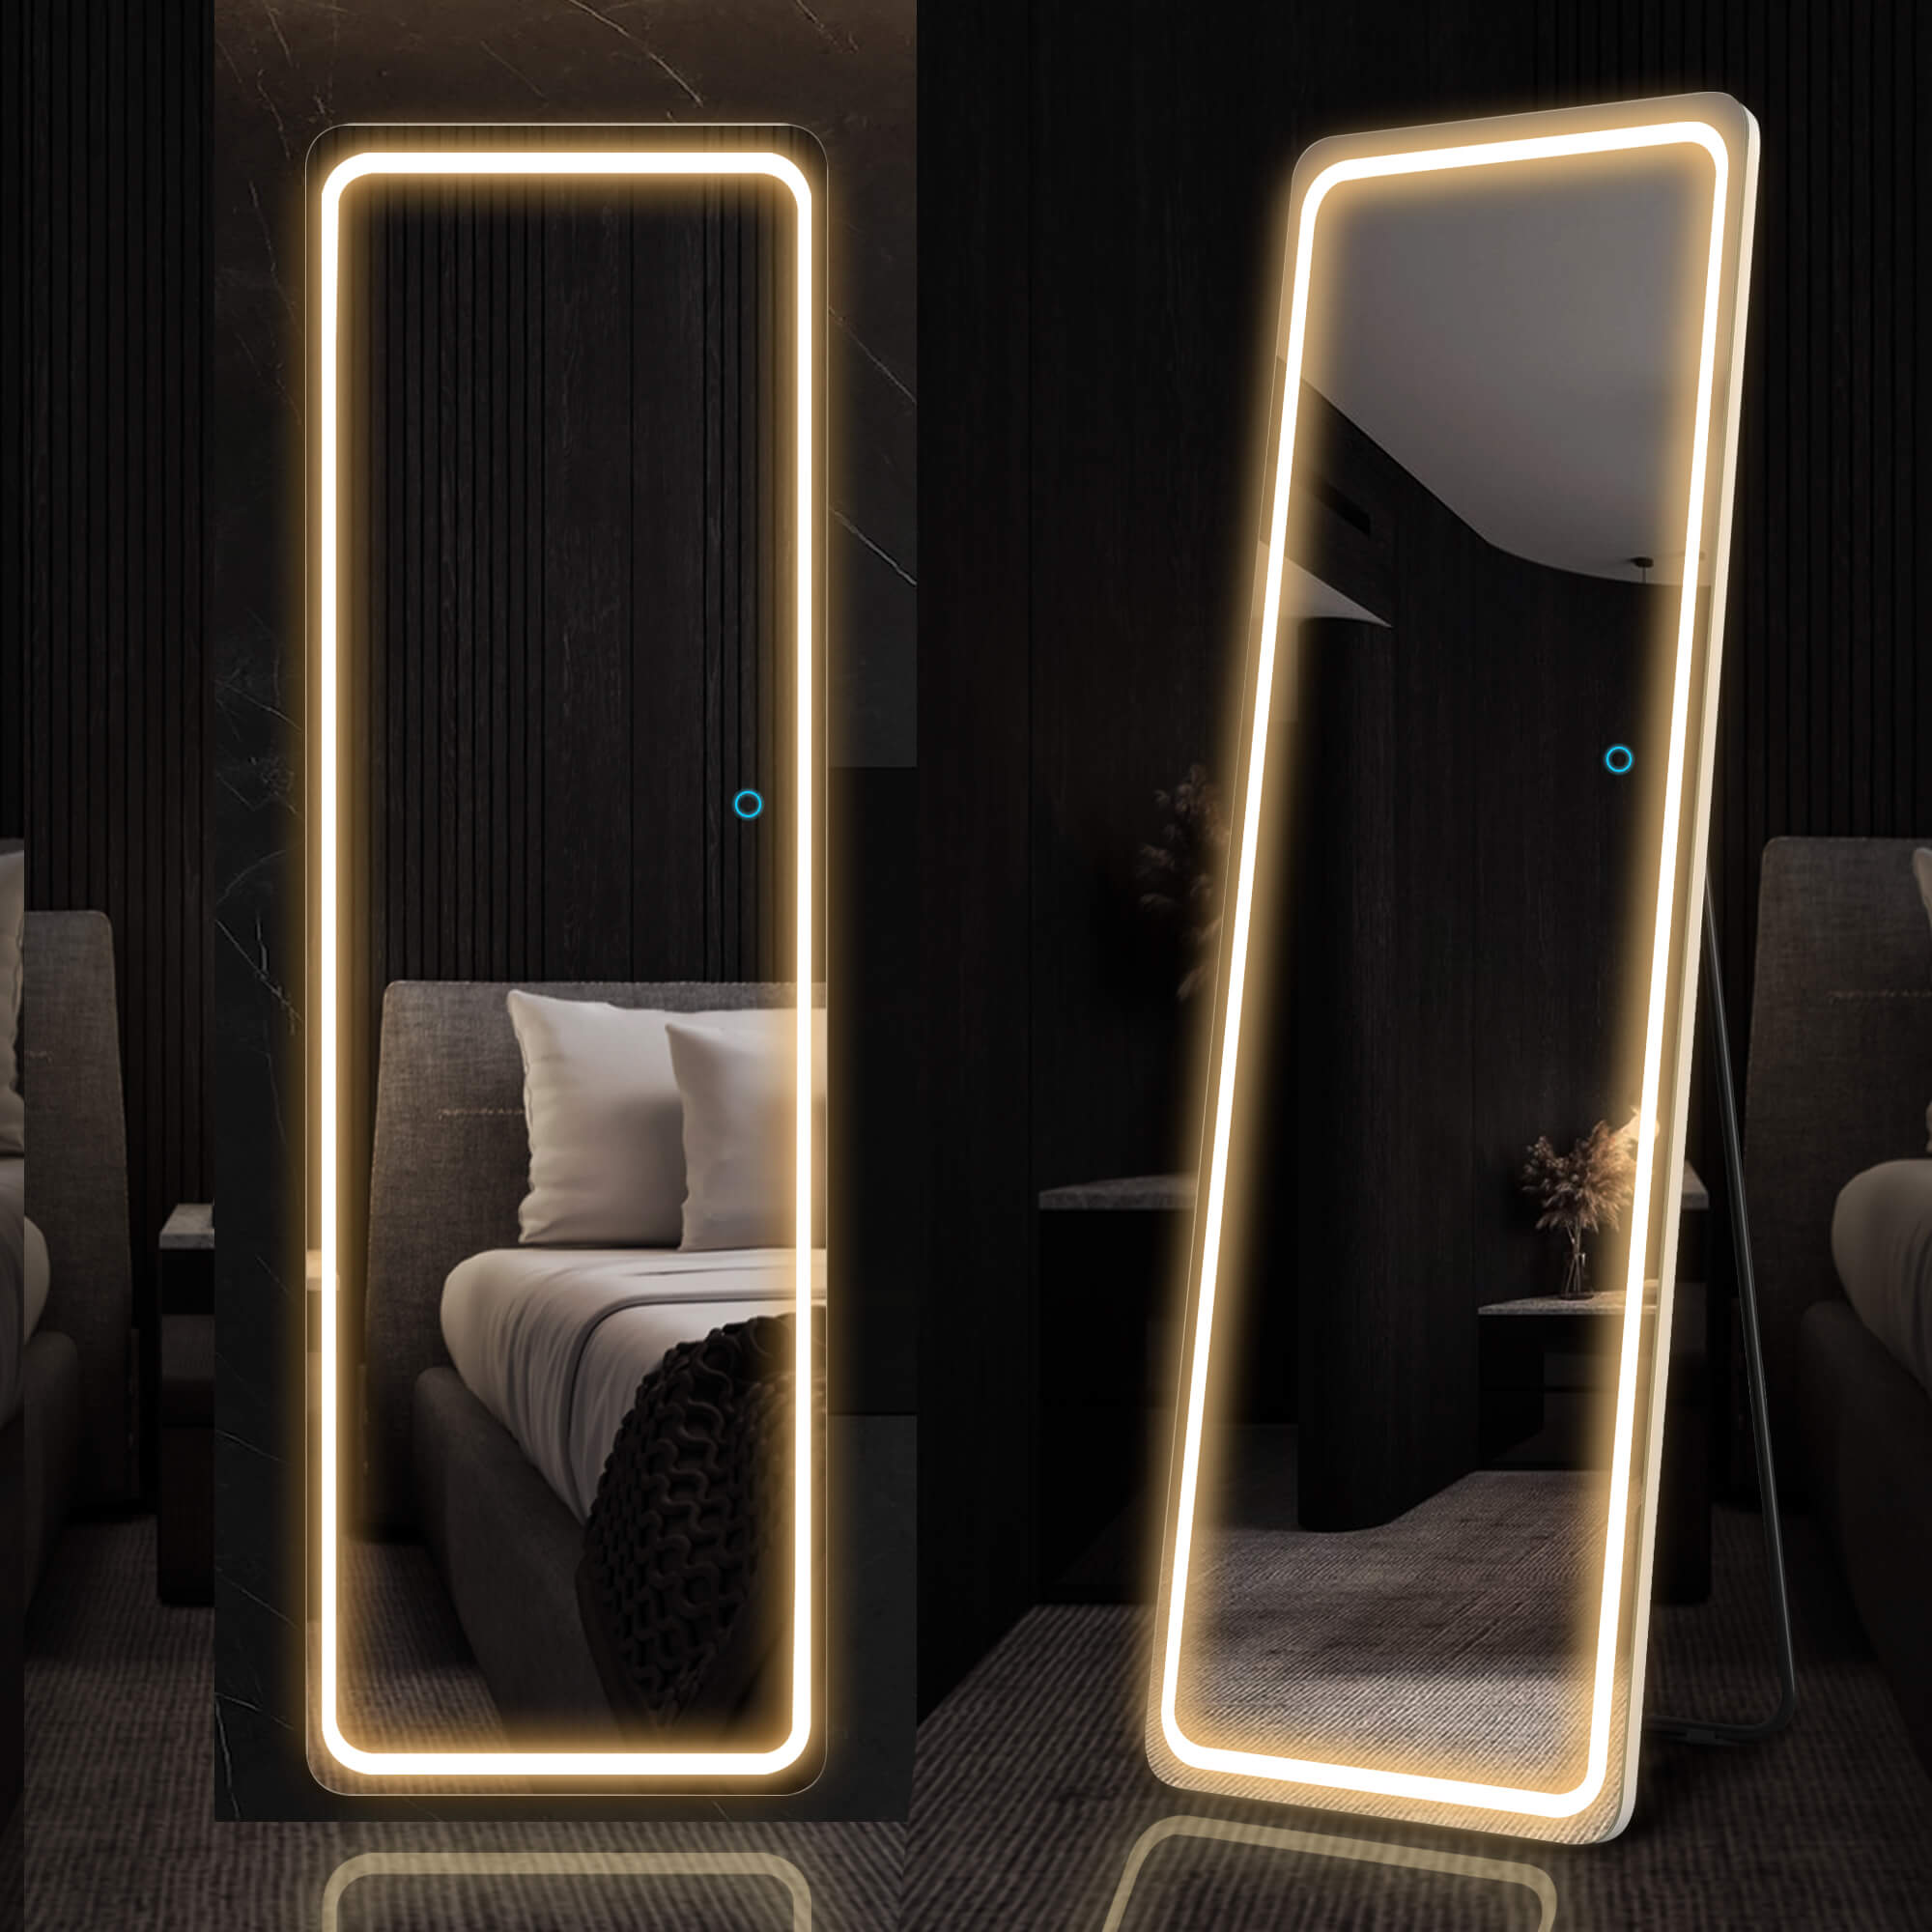 LVSOMT 63"x20" Full-Length Mirror with LED Lights, Free Standing Floor Mirror, Wall Mounted Hanging Mirror, Lighted Vanity Body Mirror, Full-Size Tall Mirror, Big Stand Up Mirror for Bedroom 